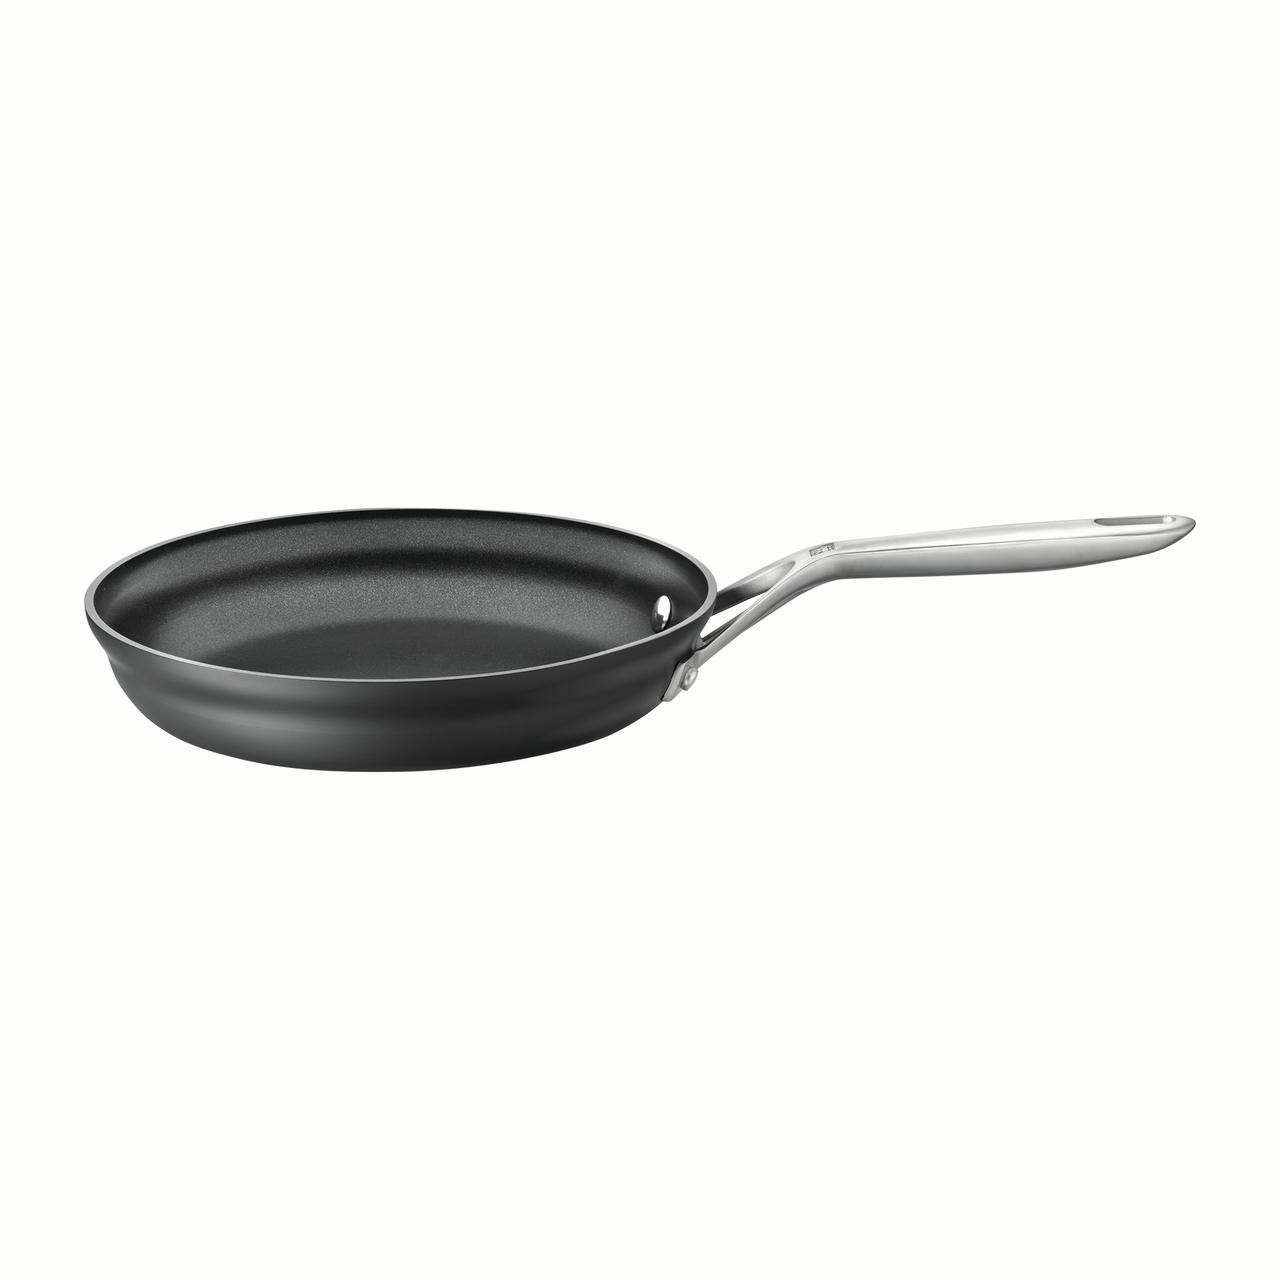 https://cdn11.bigcommerce.com/s-hccytny0od/images/stencil/1280x1280/products/2745/9782/zwilling-motion-nonstick-fry-pan-10in__95870.1566033313.jpg?c=2?imbypass=on